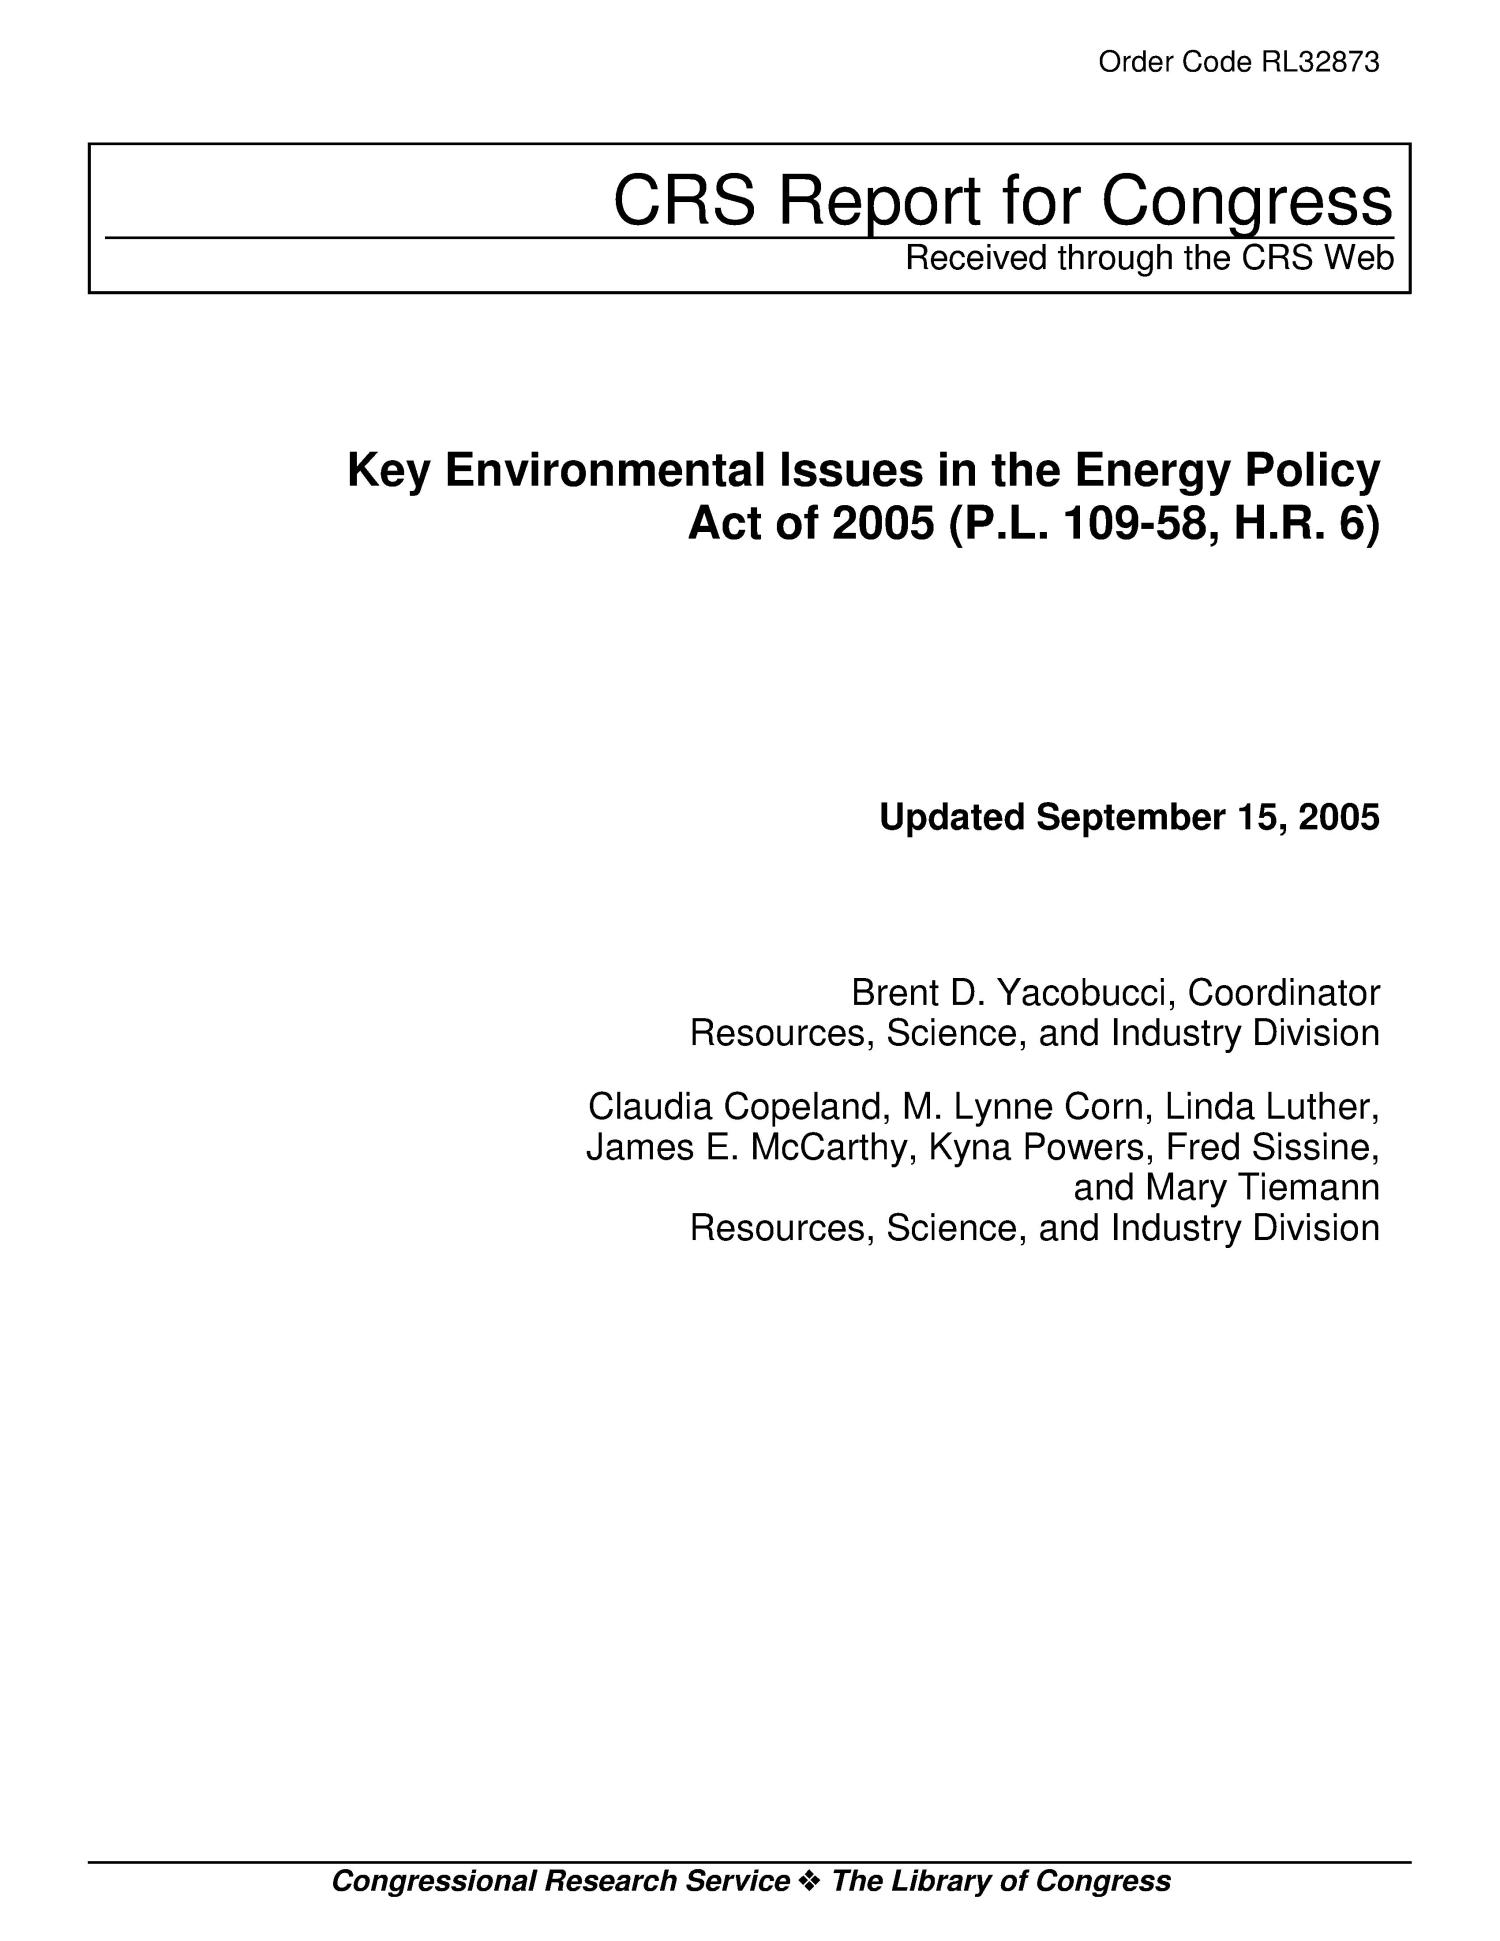 Key Environmental Issues in the Energy Policy Act of 2005 (P.L. 109-58, H.R. 6)
                                                
                                                    [Sequence #]: 1 of 20
                                                